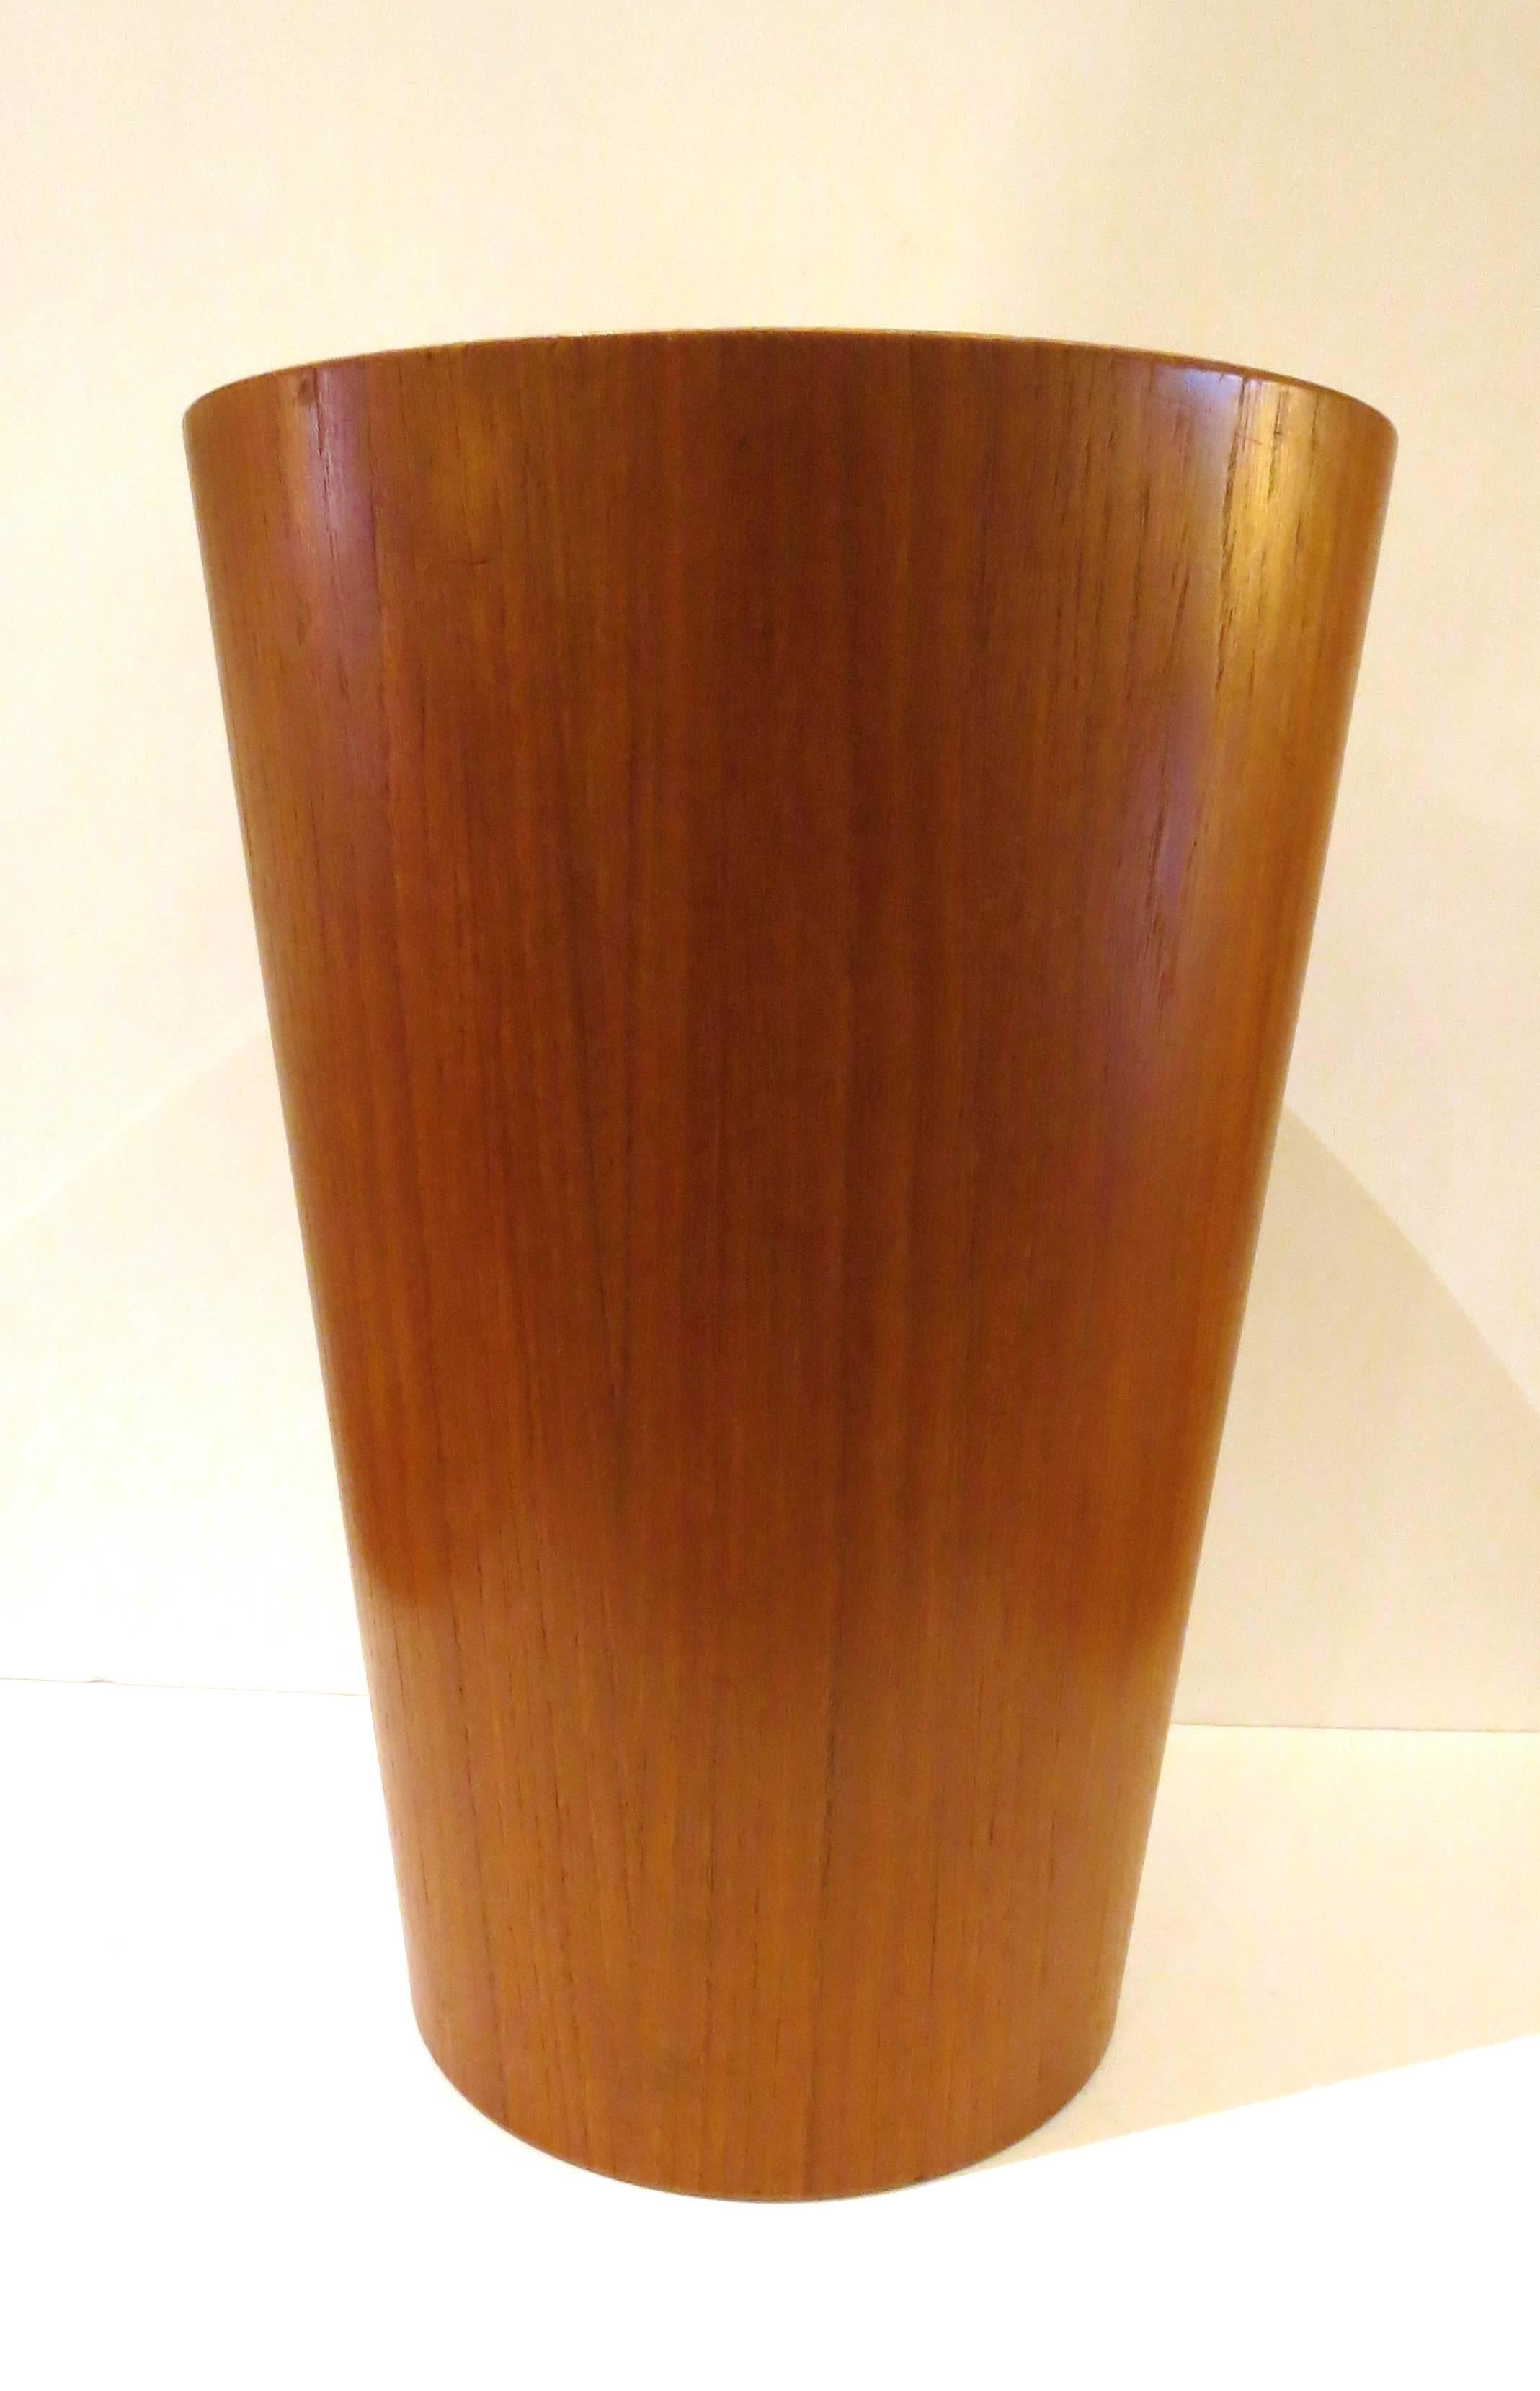 Simple elegant design on this trashcan, waste paper basket, circa 1950s, made in Sweden by Servex excellent condition no chips or cracks, in teak finish all original and in cone shape.